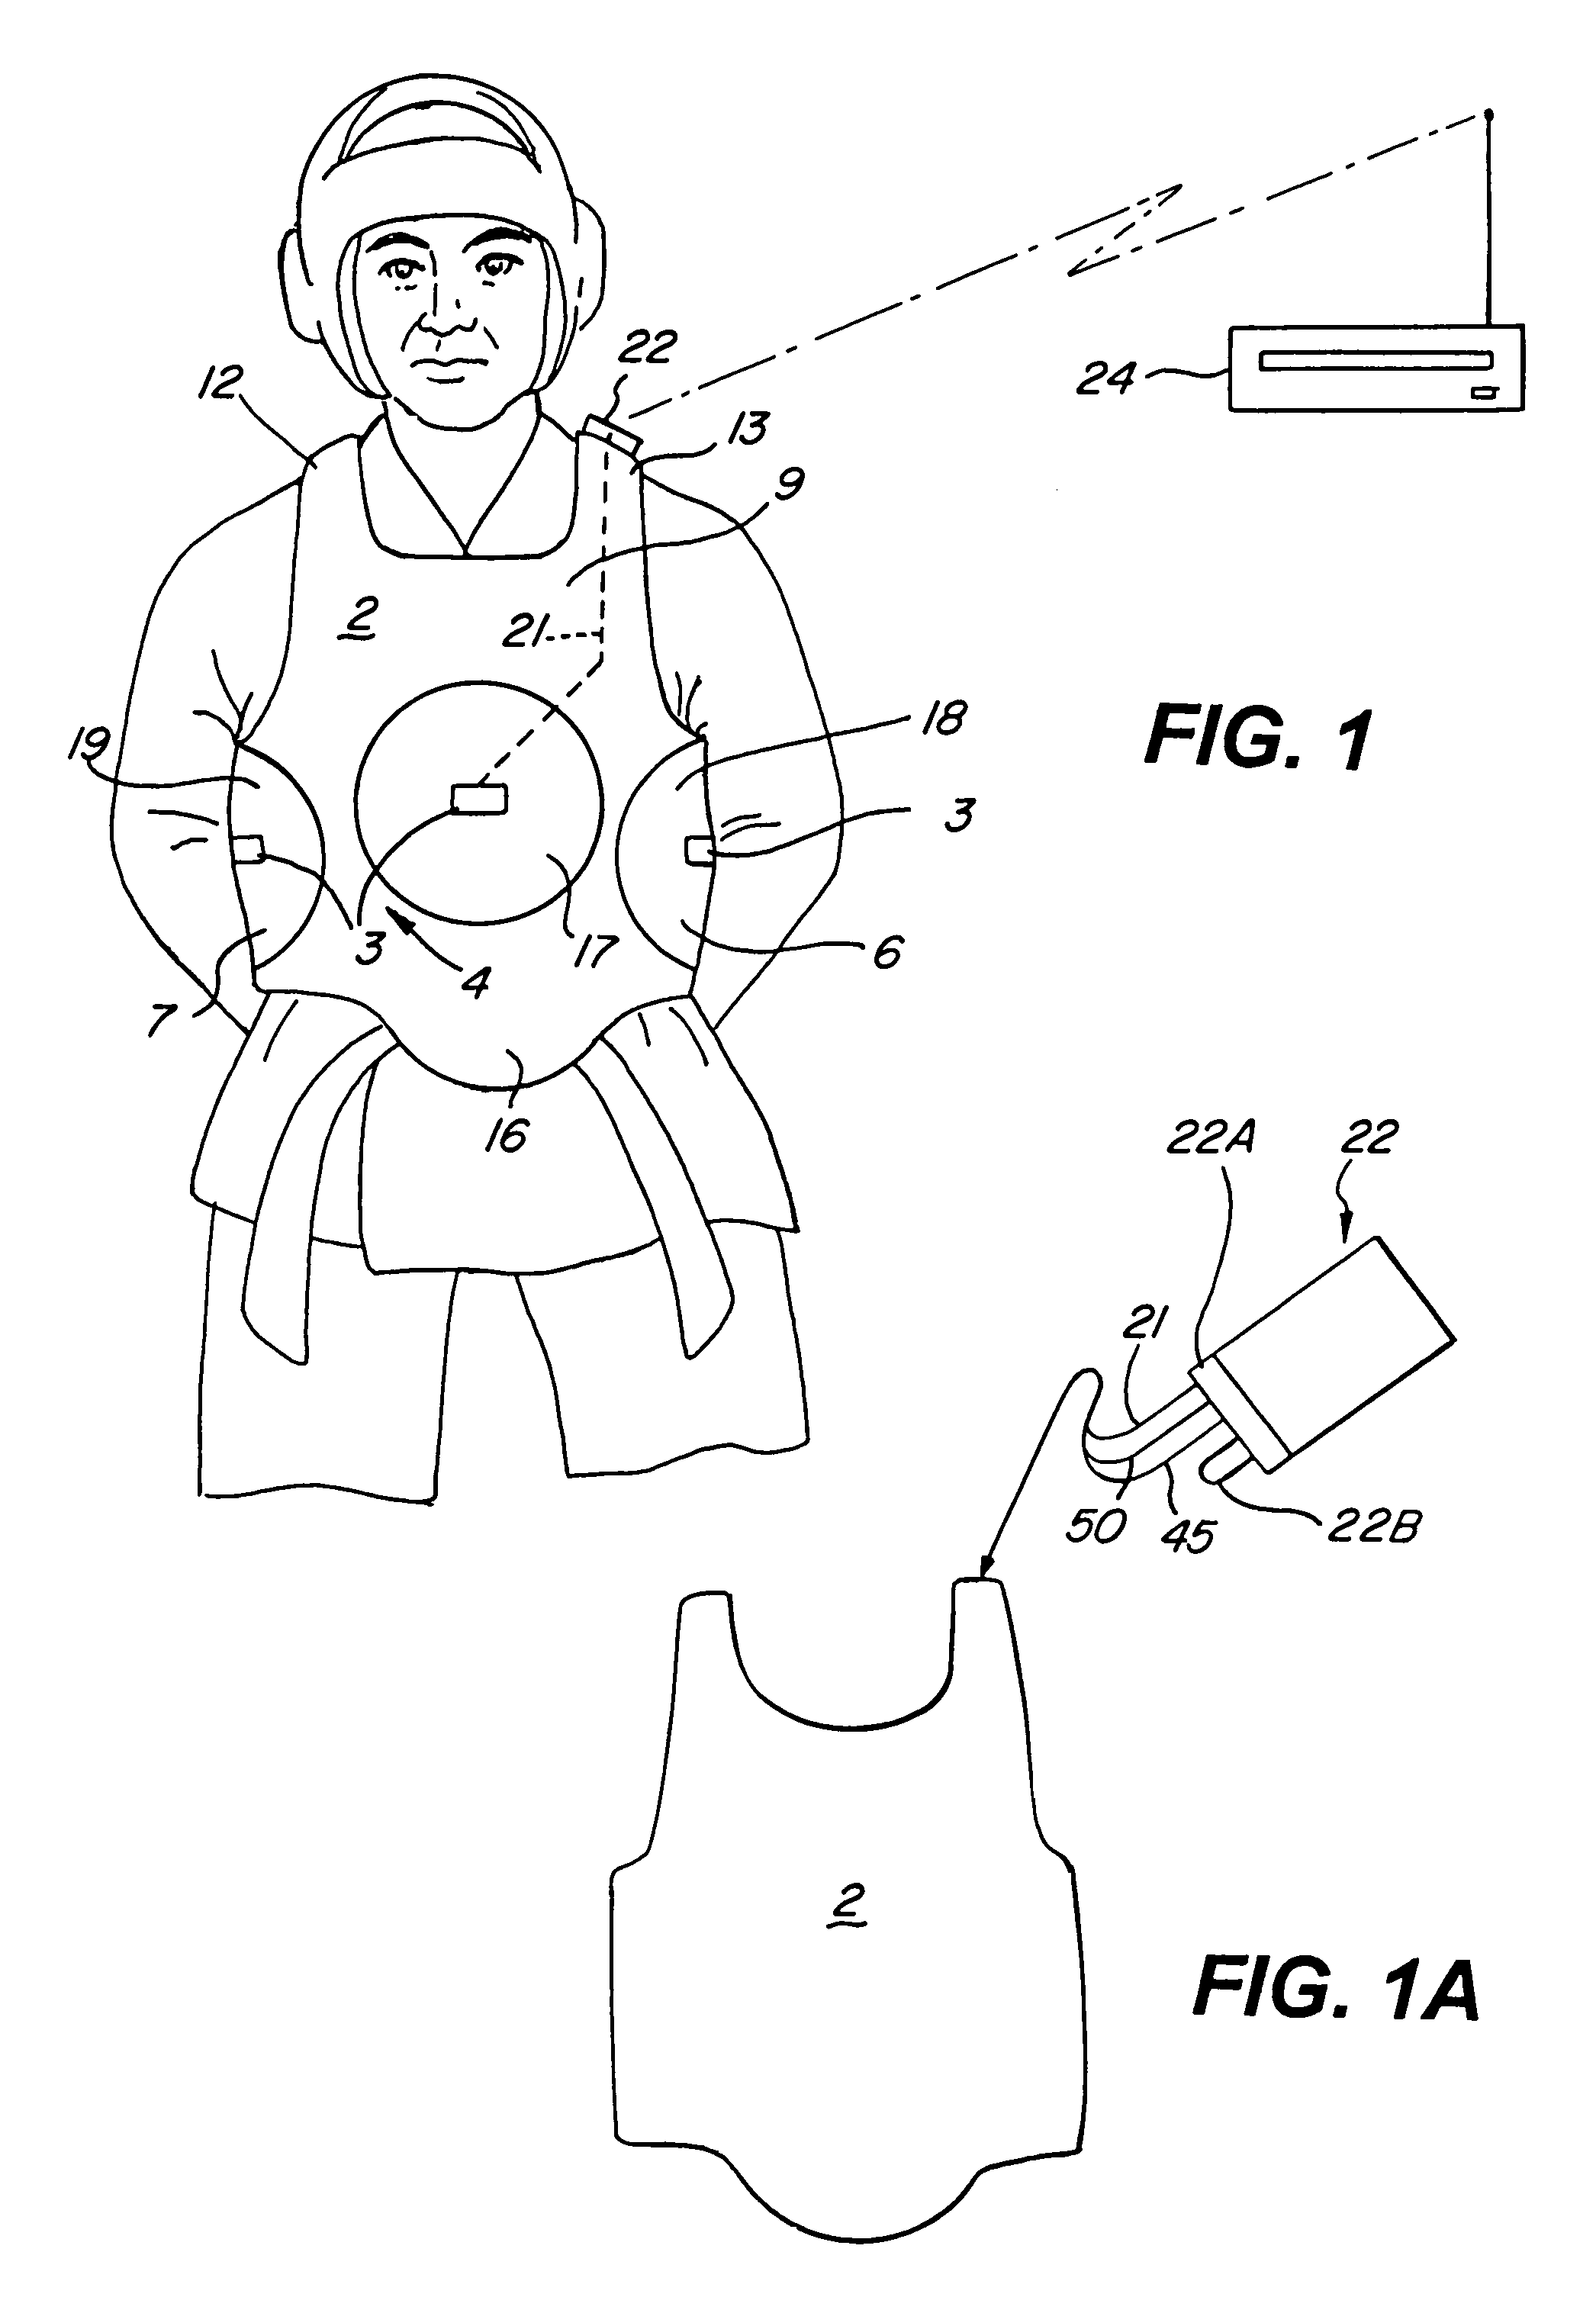 Apparatus for monitoring and registering the location and intensity of impacts in sports